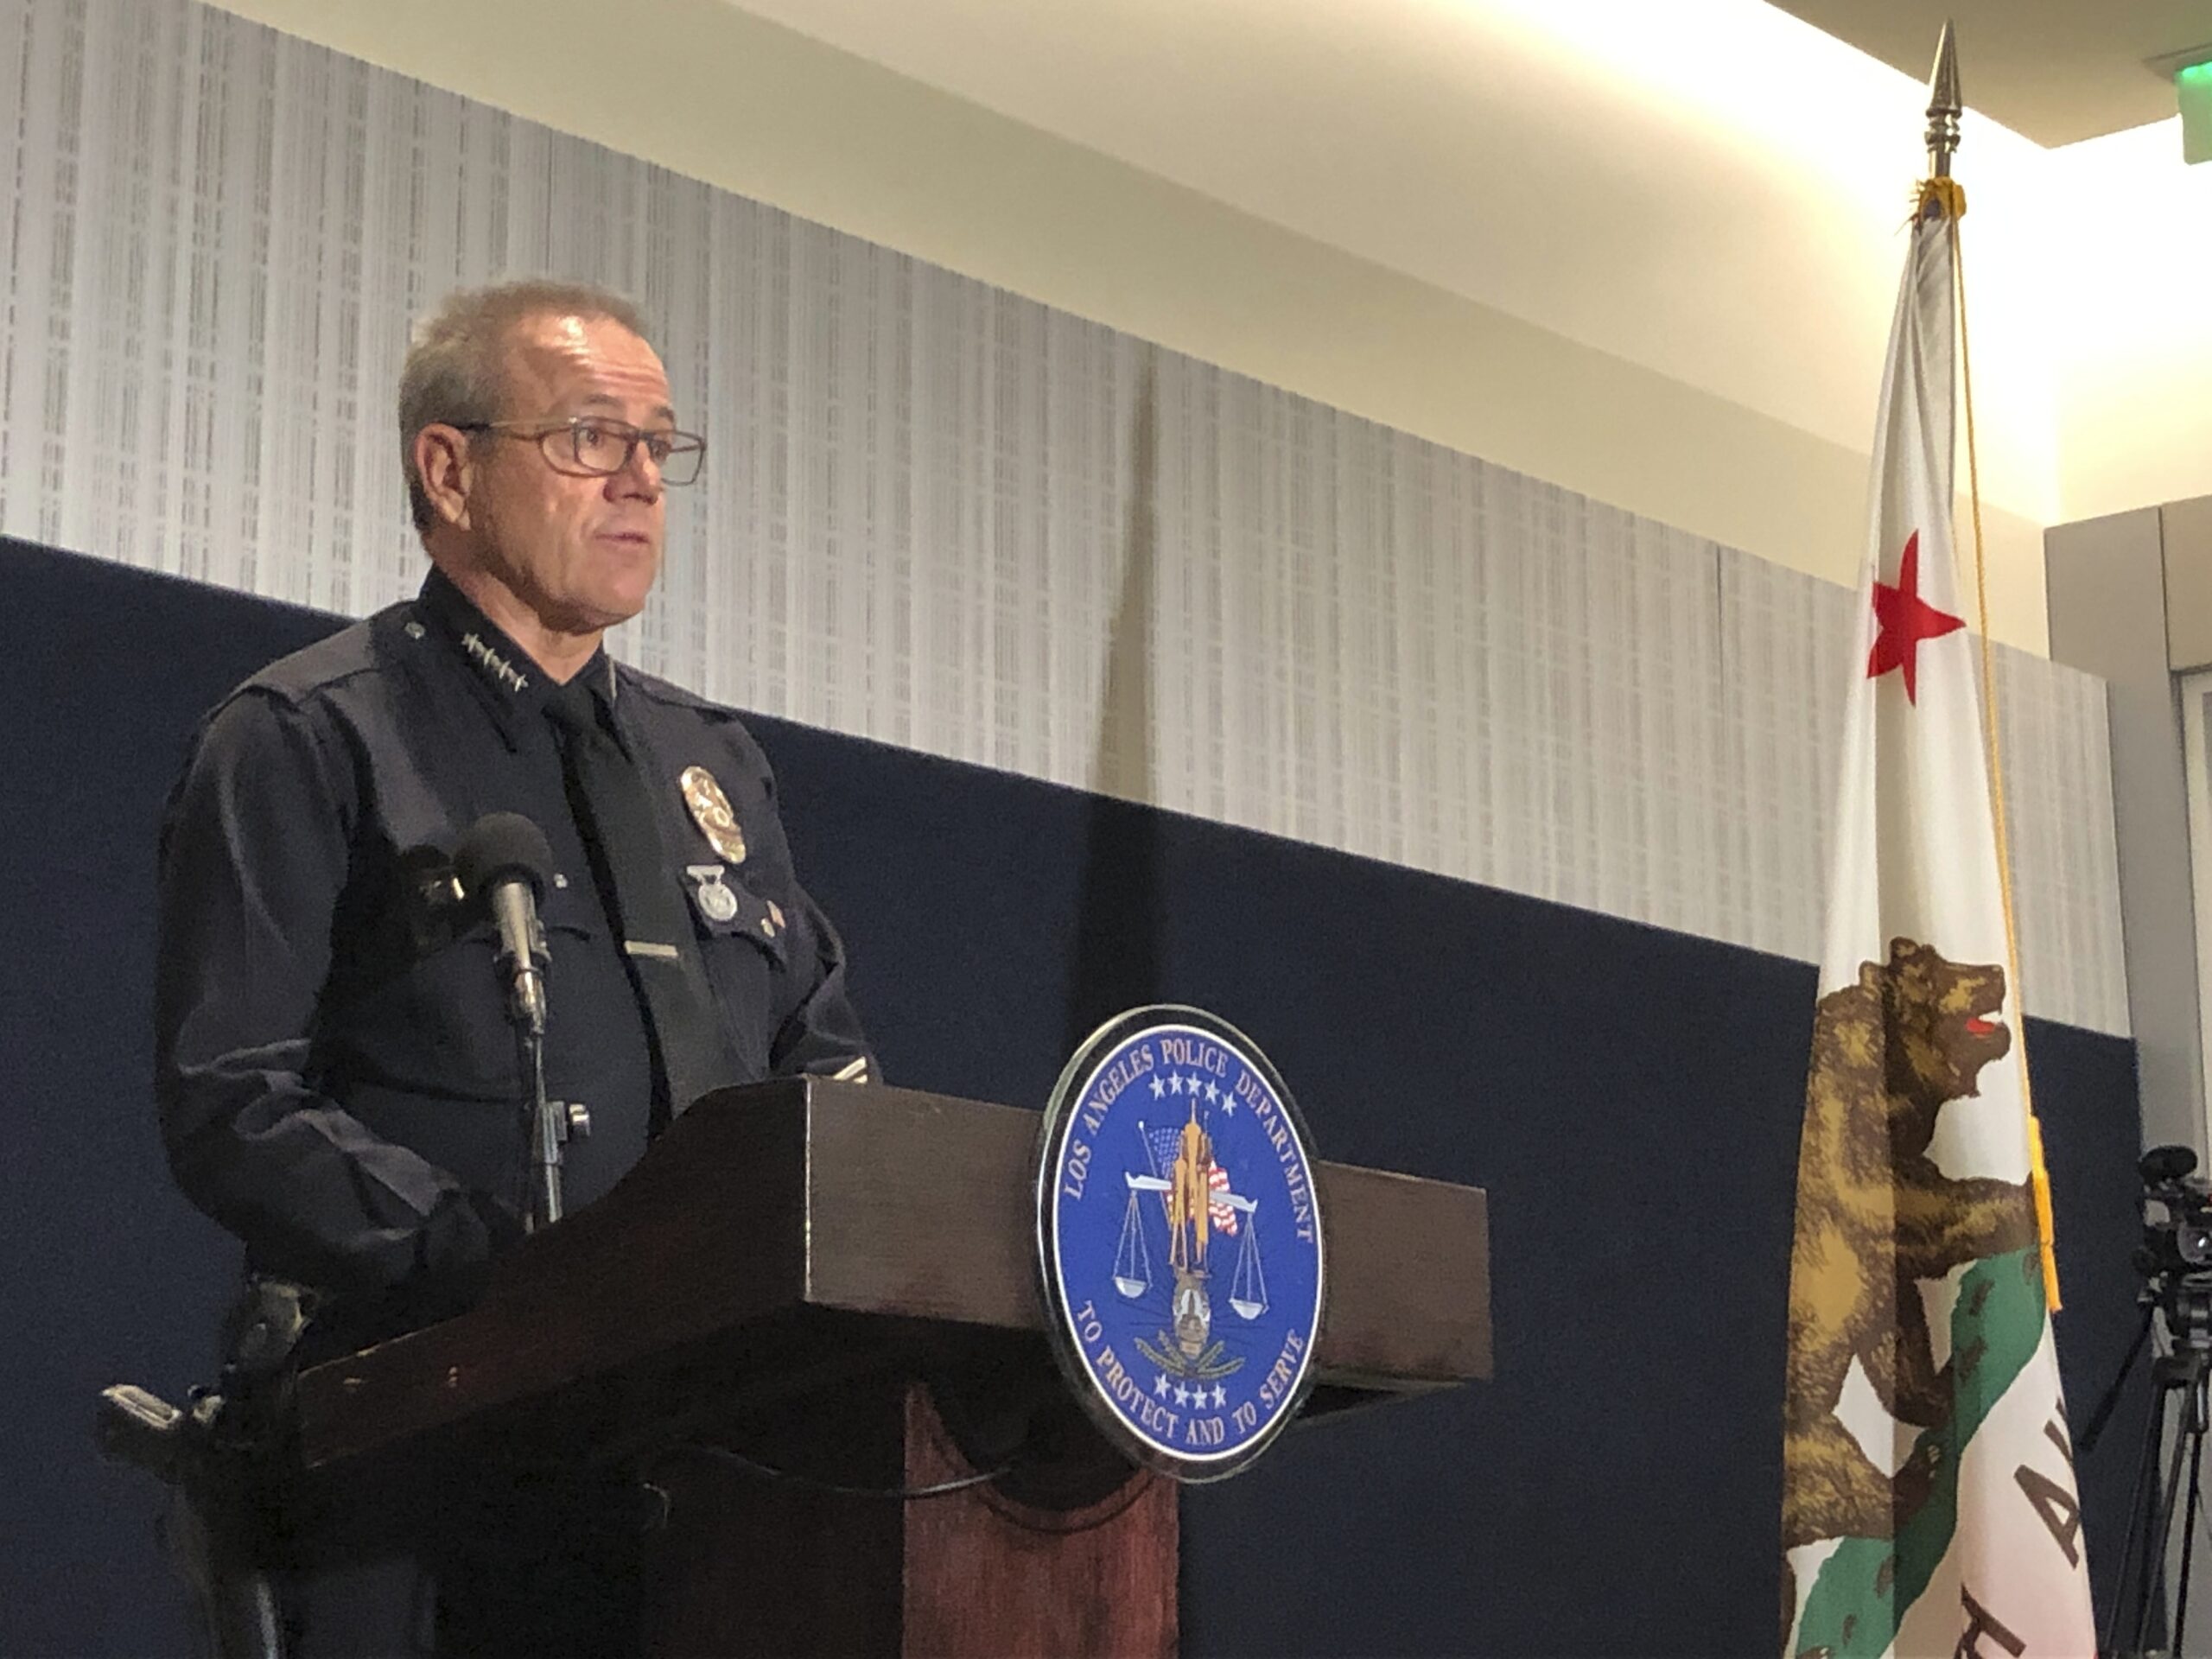 Los Angeles Police Chief Michel Moore discusses recent fatal police shootings during a news conference on Wednesday, Jan. 11, 2023, at LAPD headquarters in Los Angeles. Photo credit: Stefanie Dazio, The Associated Press